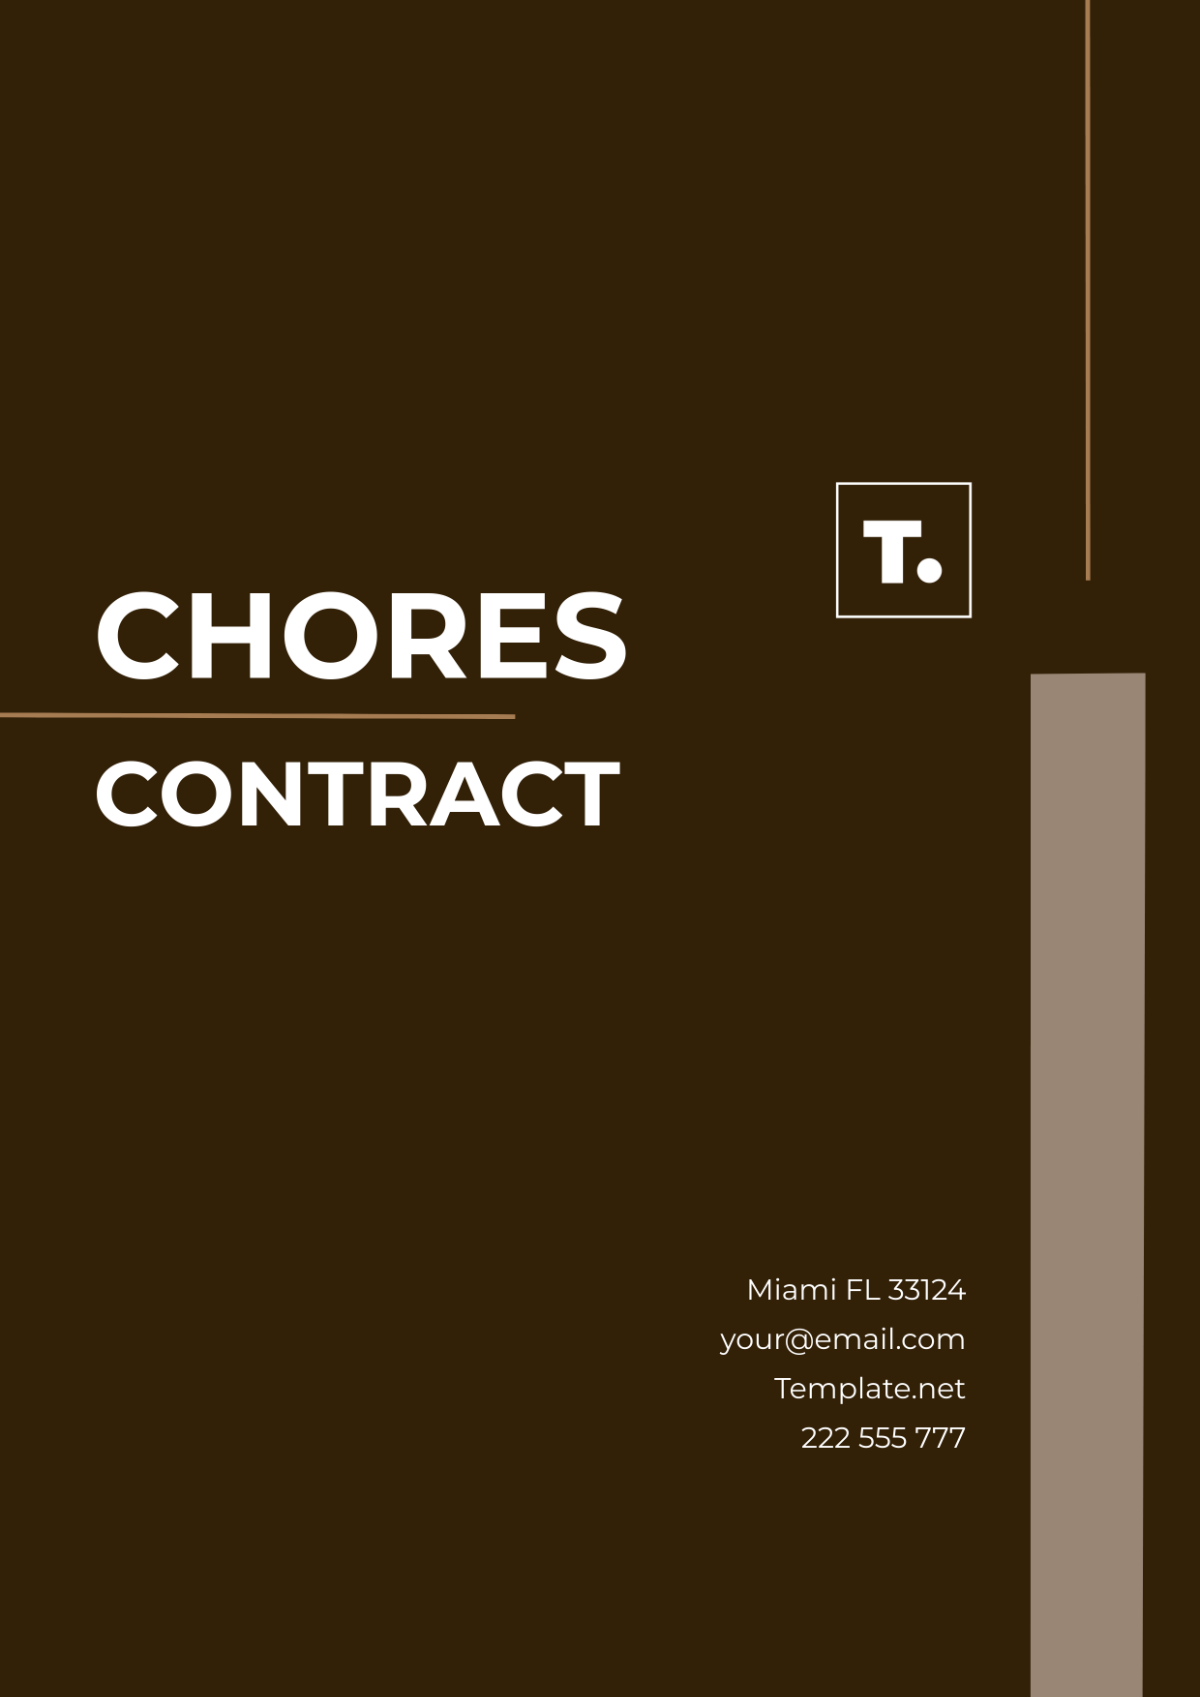 Free Chores Contract Template